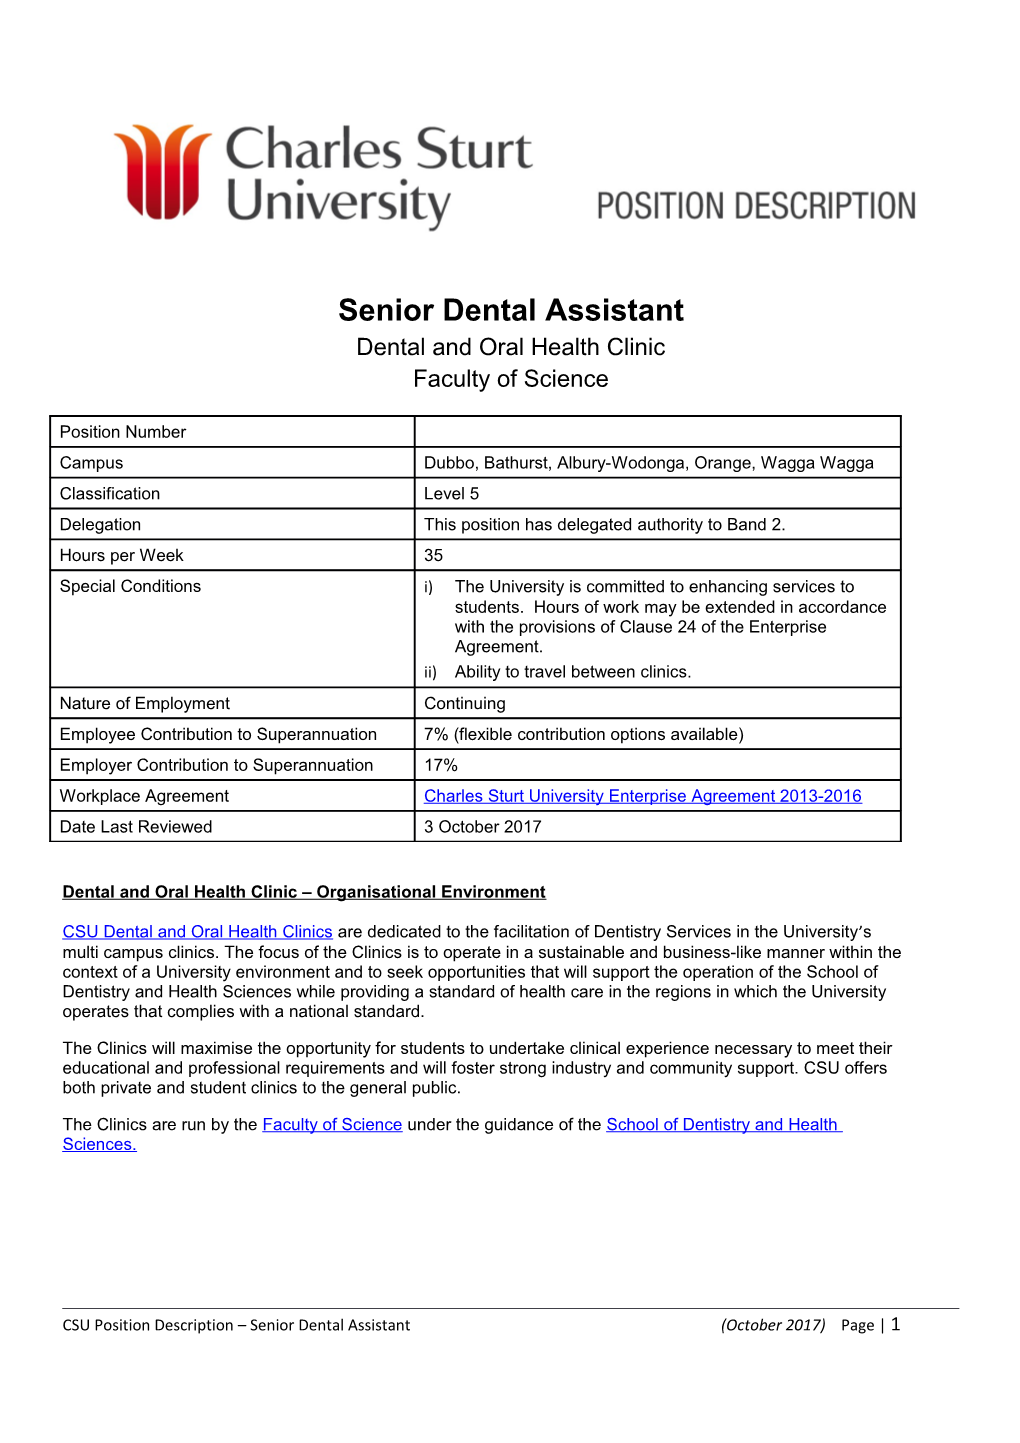 Dental and Oral Health Clinic Organisational Environment